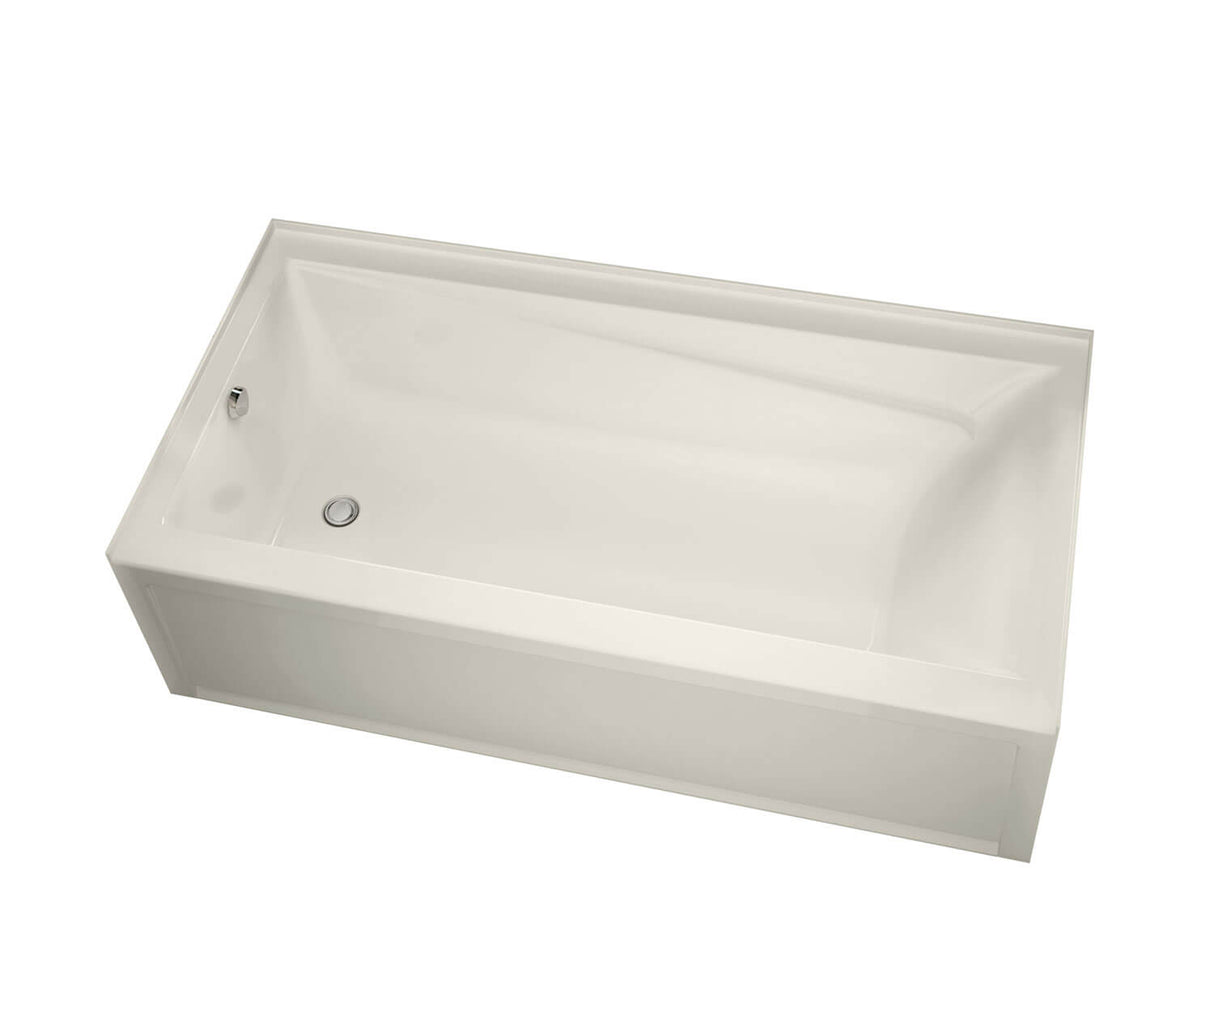 MAAX 106184-R-097-007 Exhibit 7236 IFS AFR Acrylic Alcove Right-Hand Drain Combined Whirlpool & Aeroeffect Bathtub in Biscuit